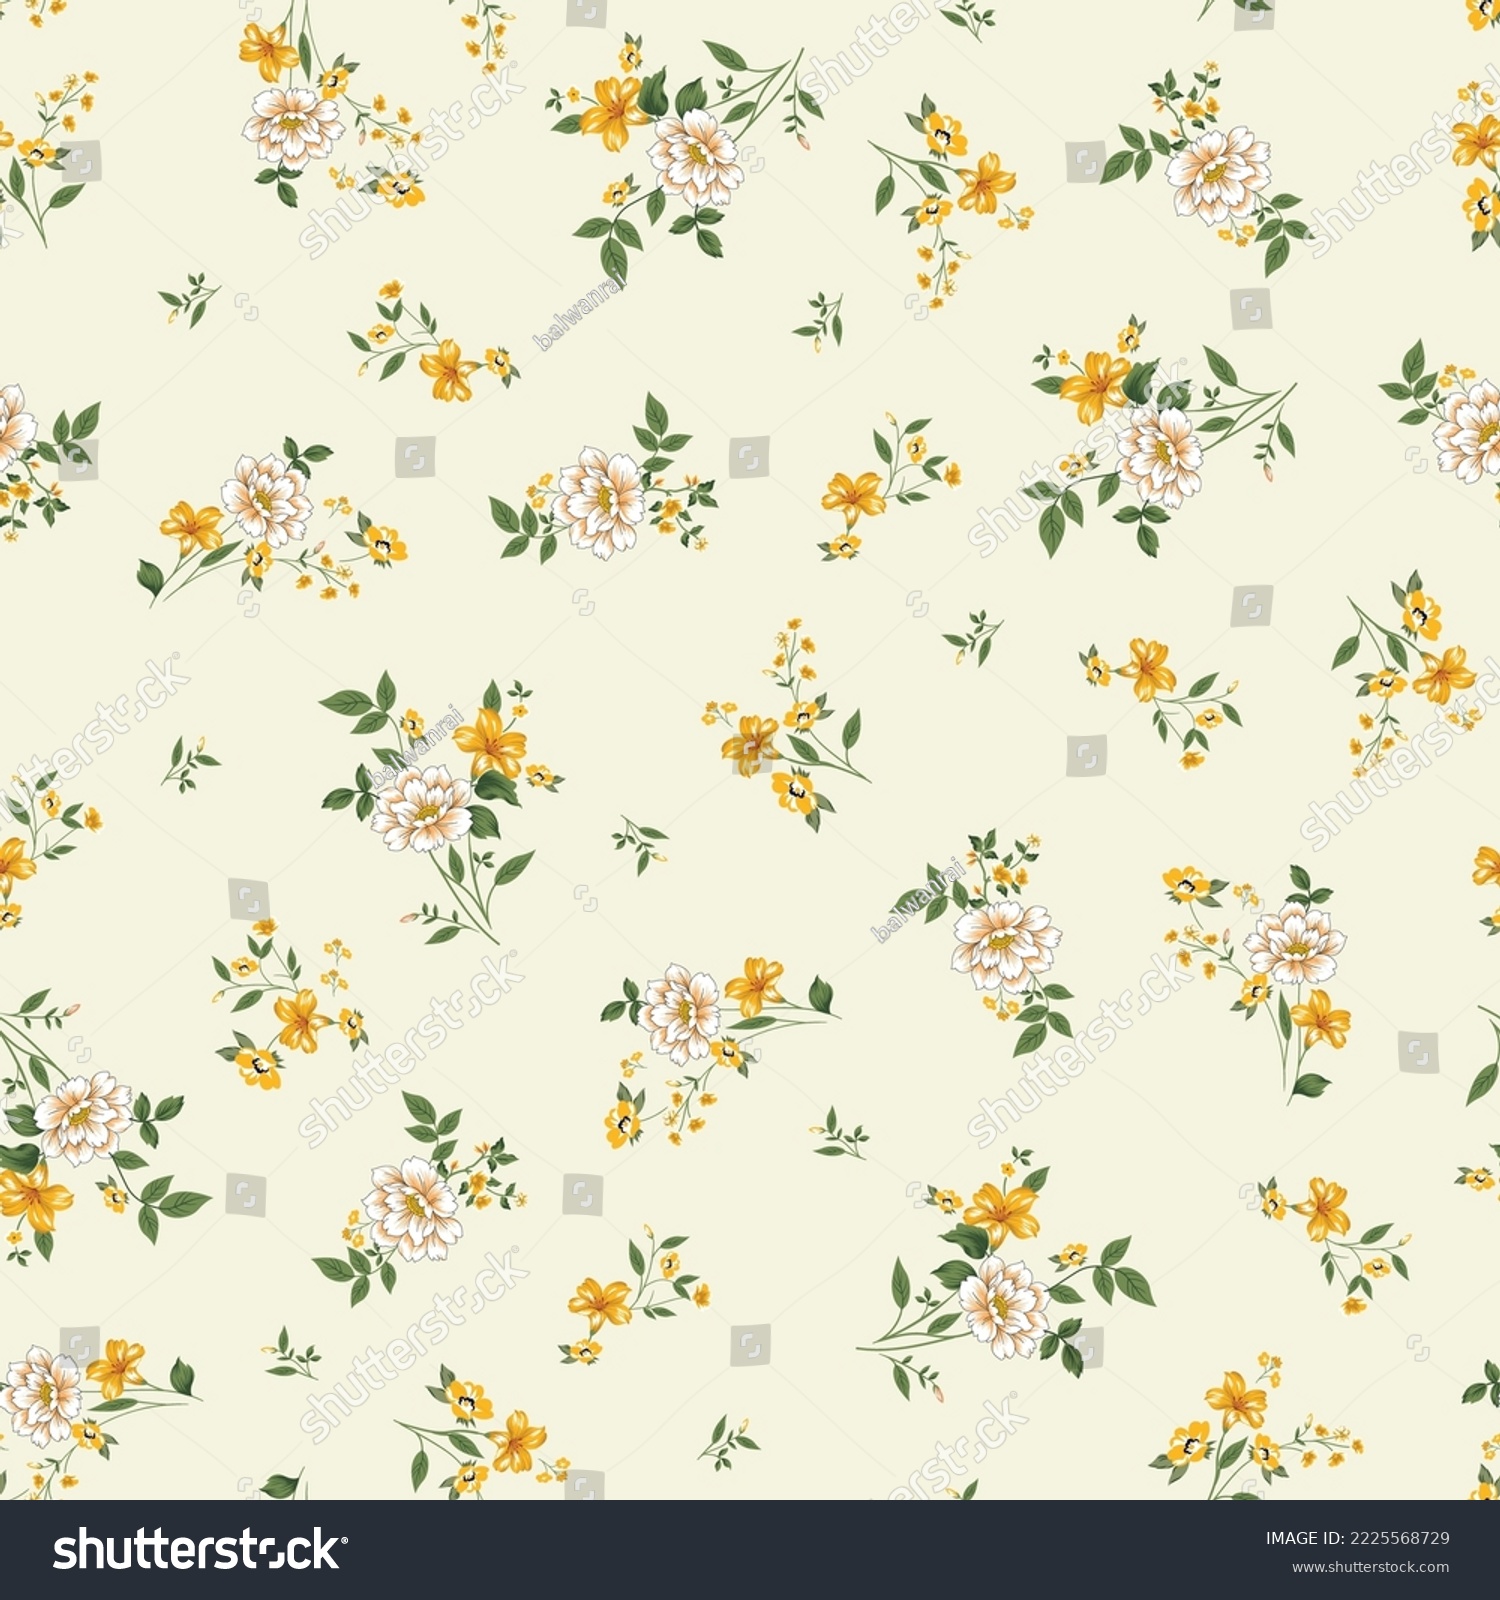 small cute flower pattern on background #2225568729